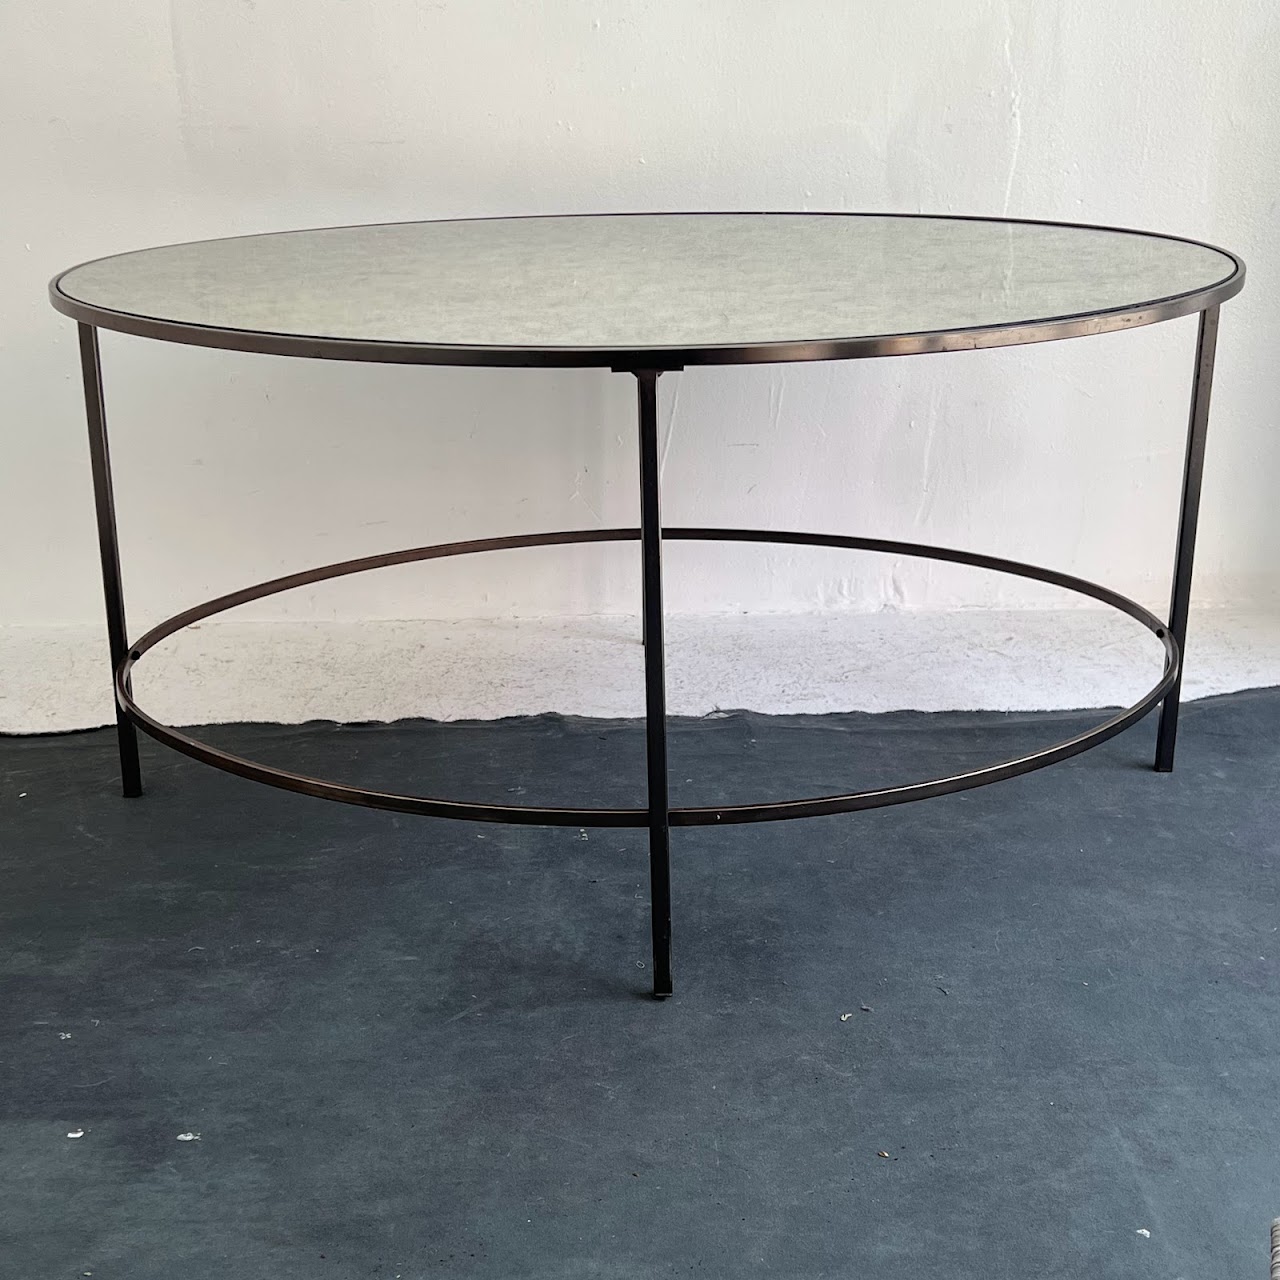 West Elm Antiqued Mirror Top Oval Coffee Table